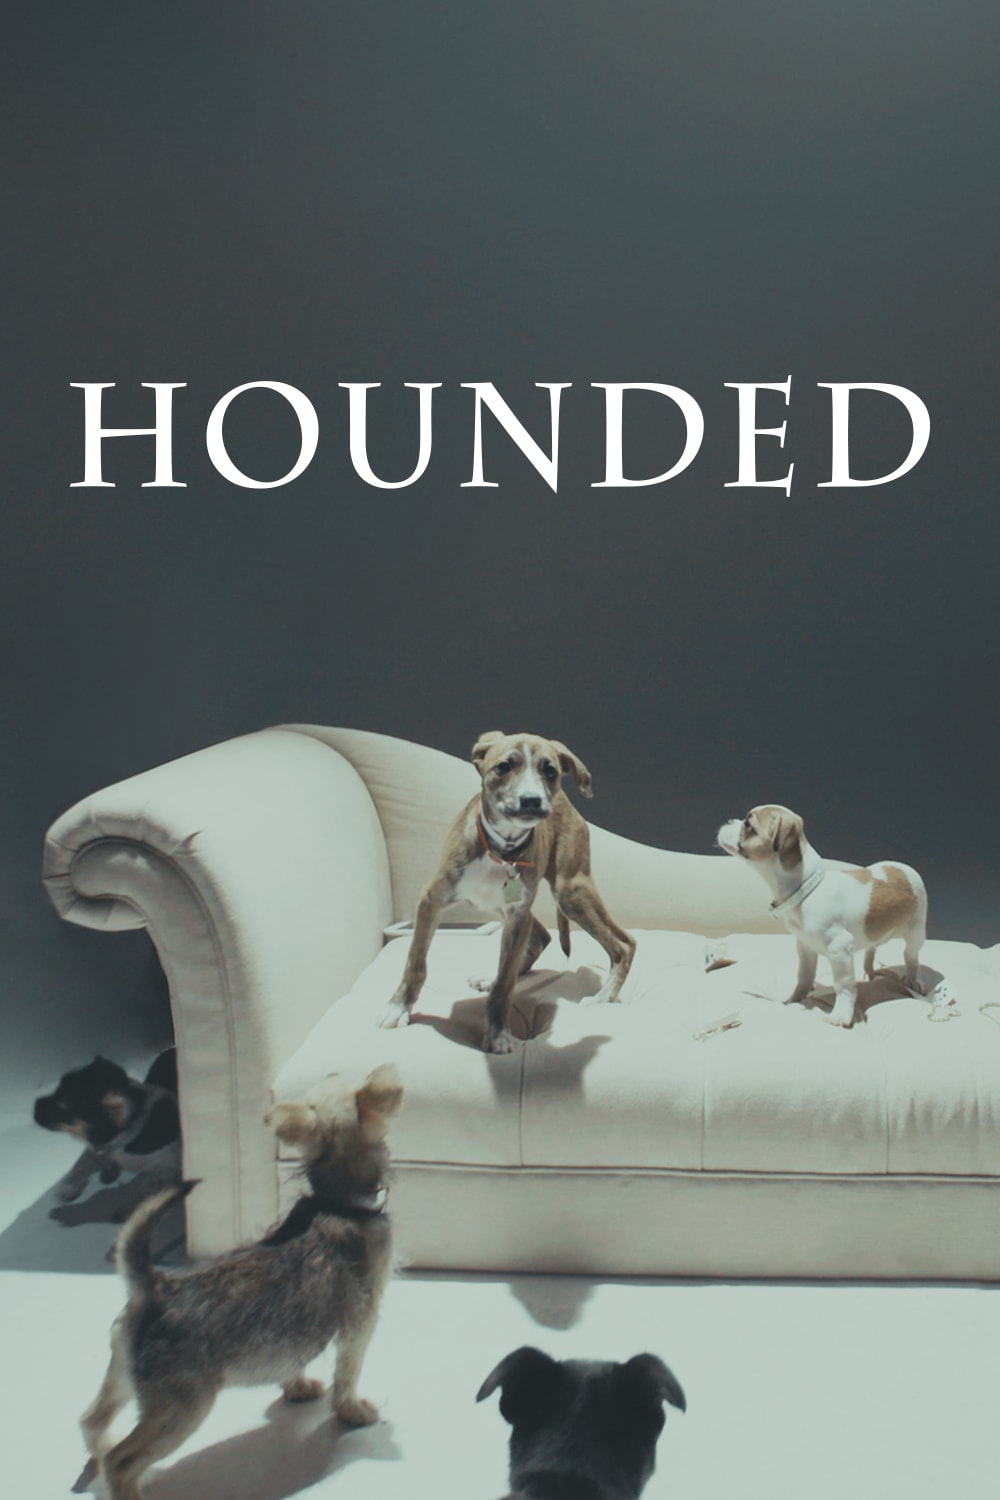 Hounded